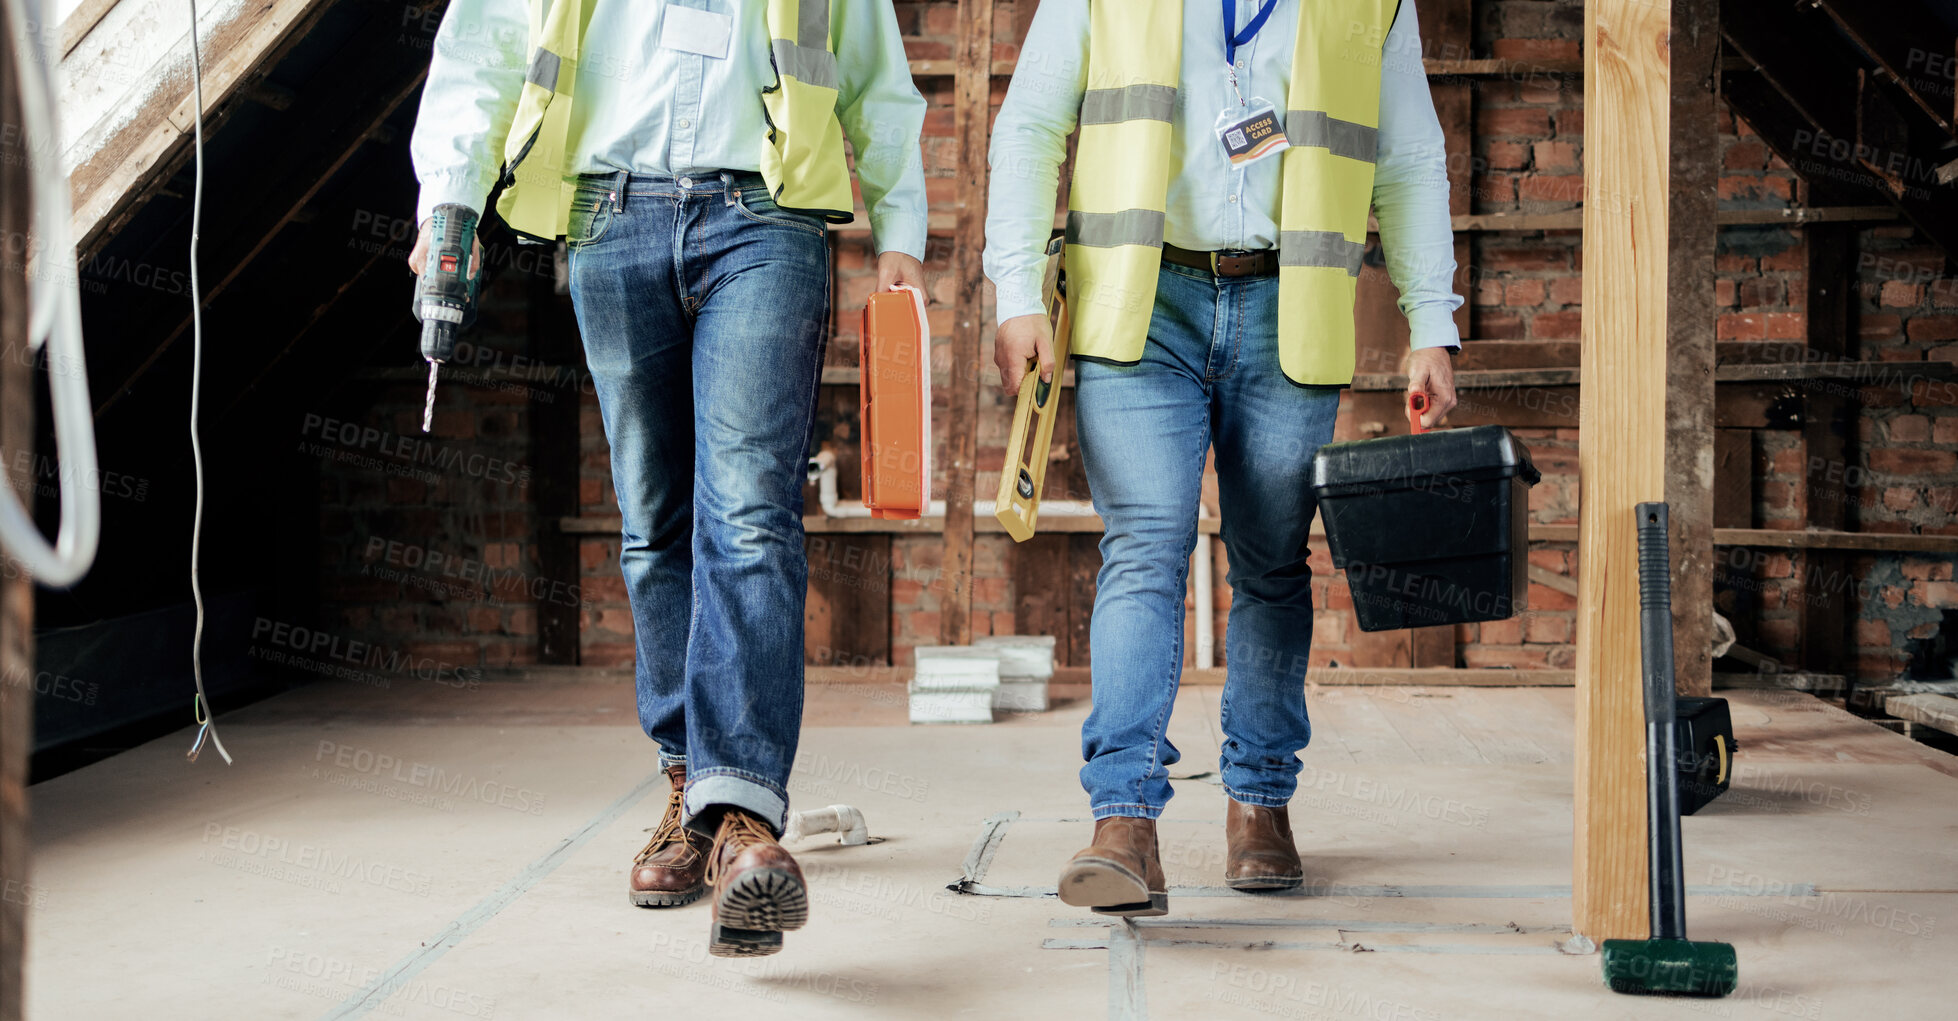 Buy stock photo Walking, construction and teamwork with an engineer and designer working on a building site. Industry, developer and collaboration with a construction worker and engineering professional at work